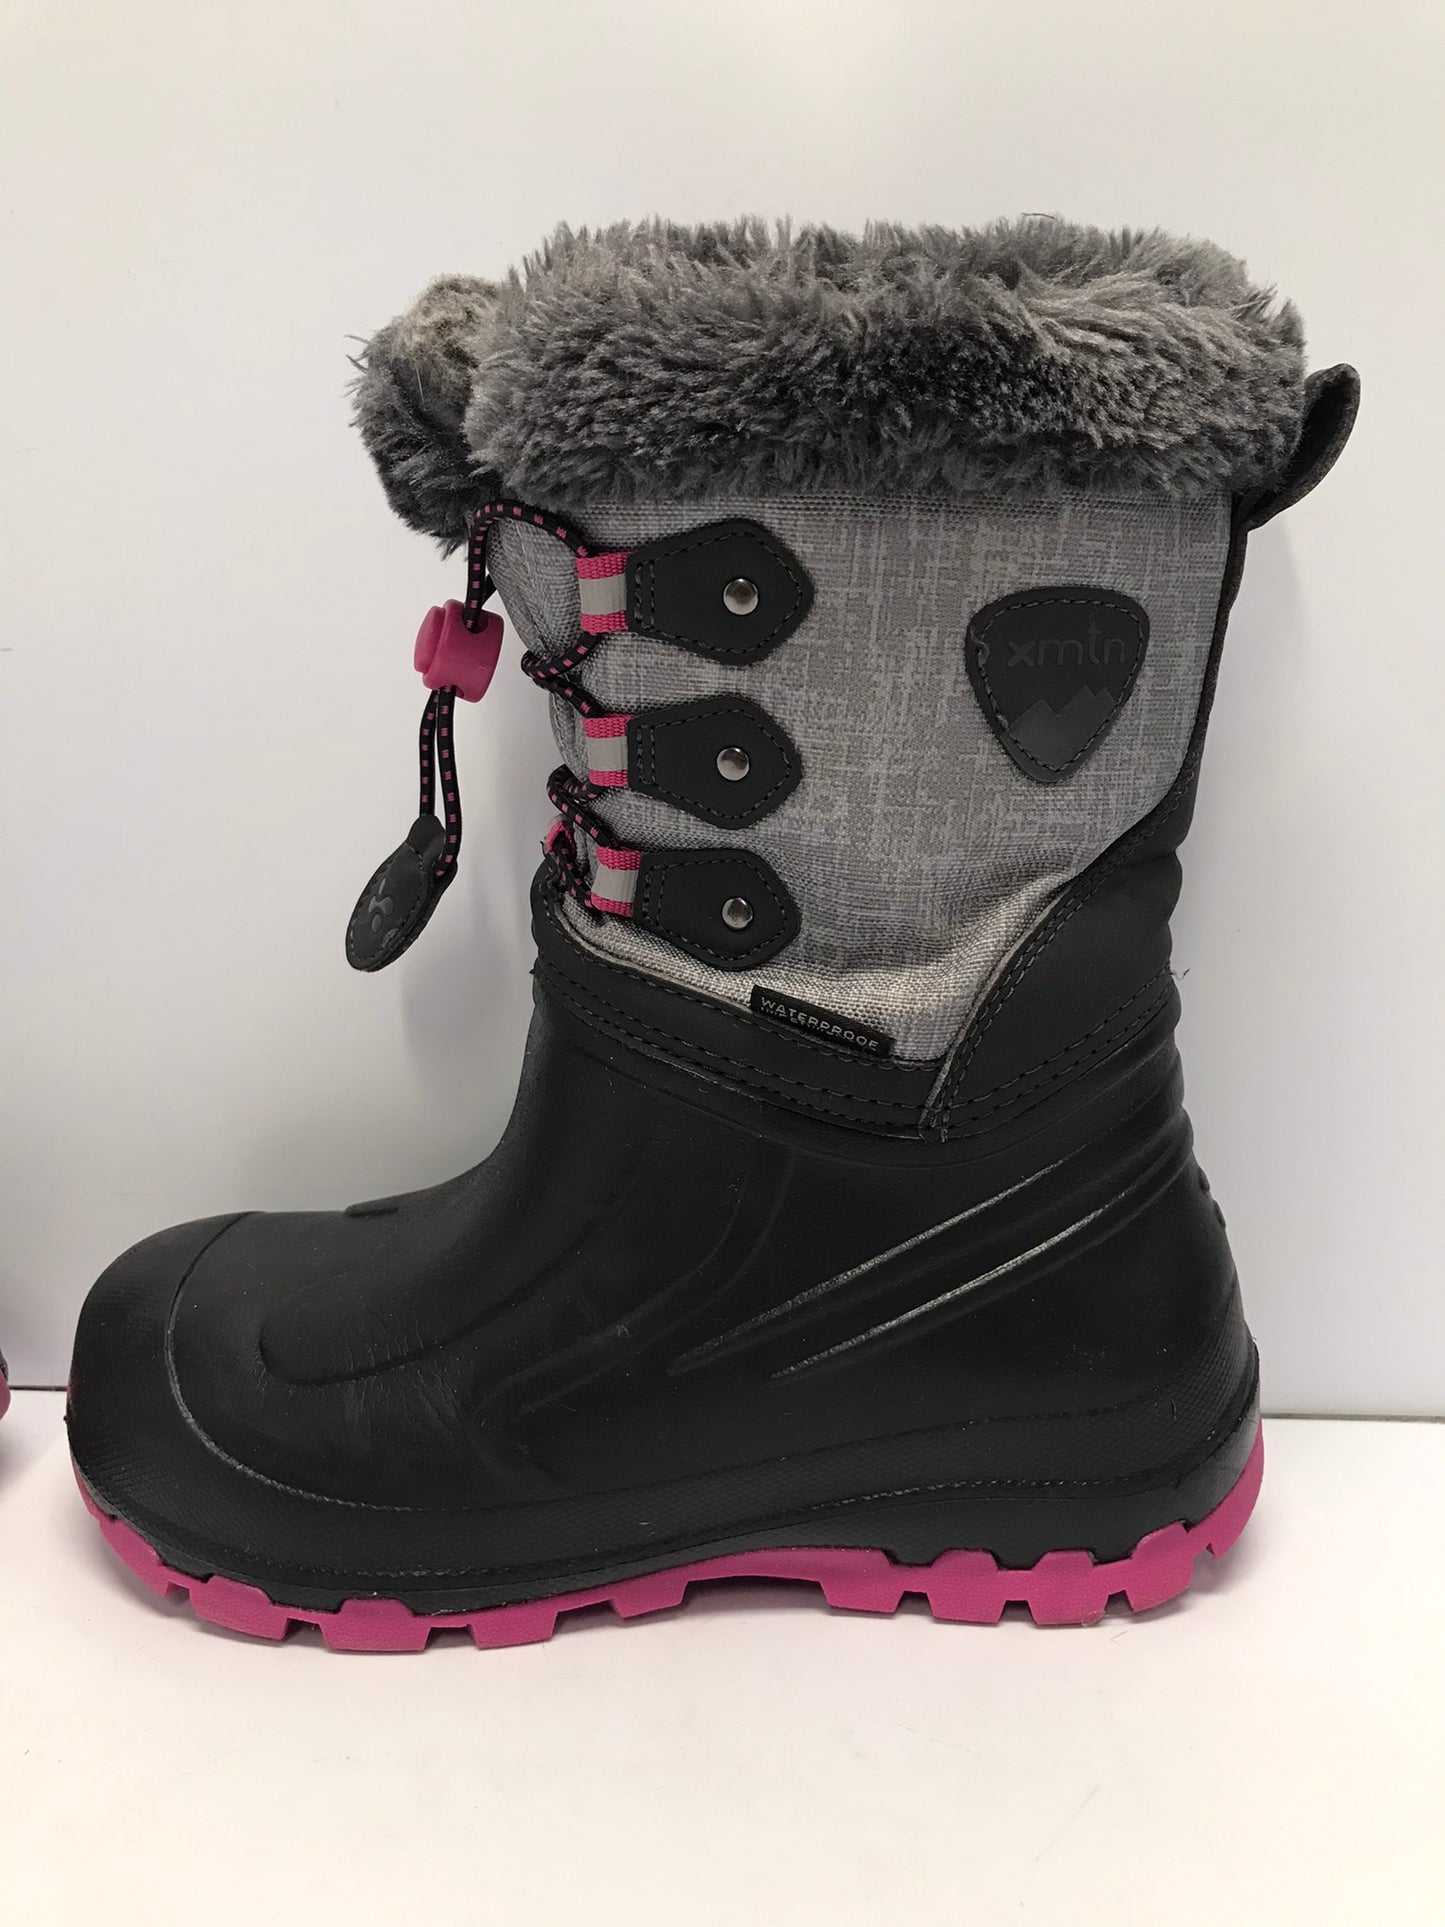 Winter Boots Child Size 1 Canadian Waterproof Grey Pink Like New